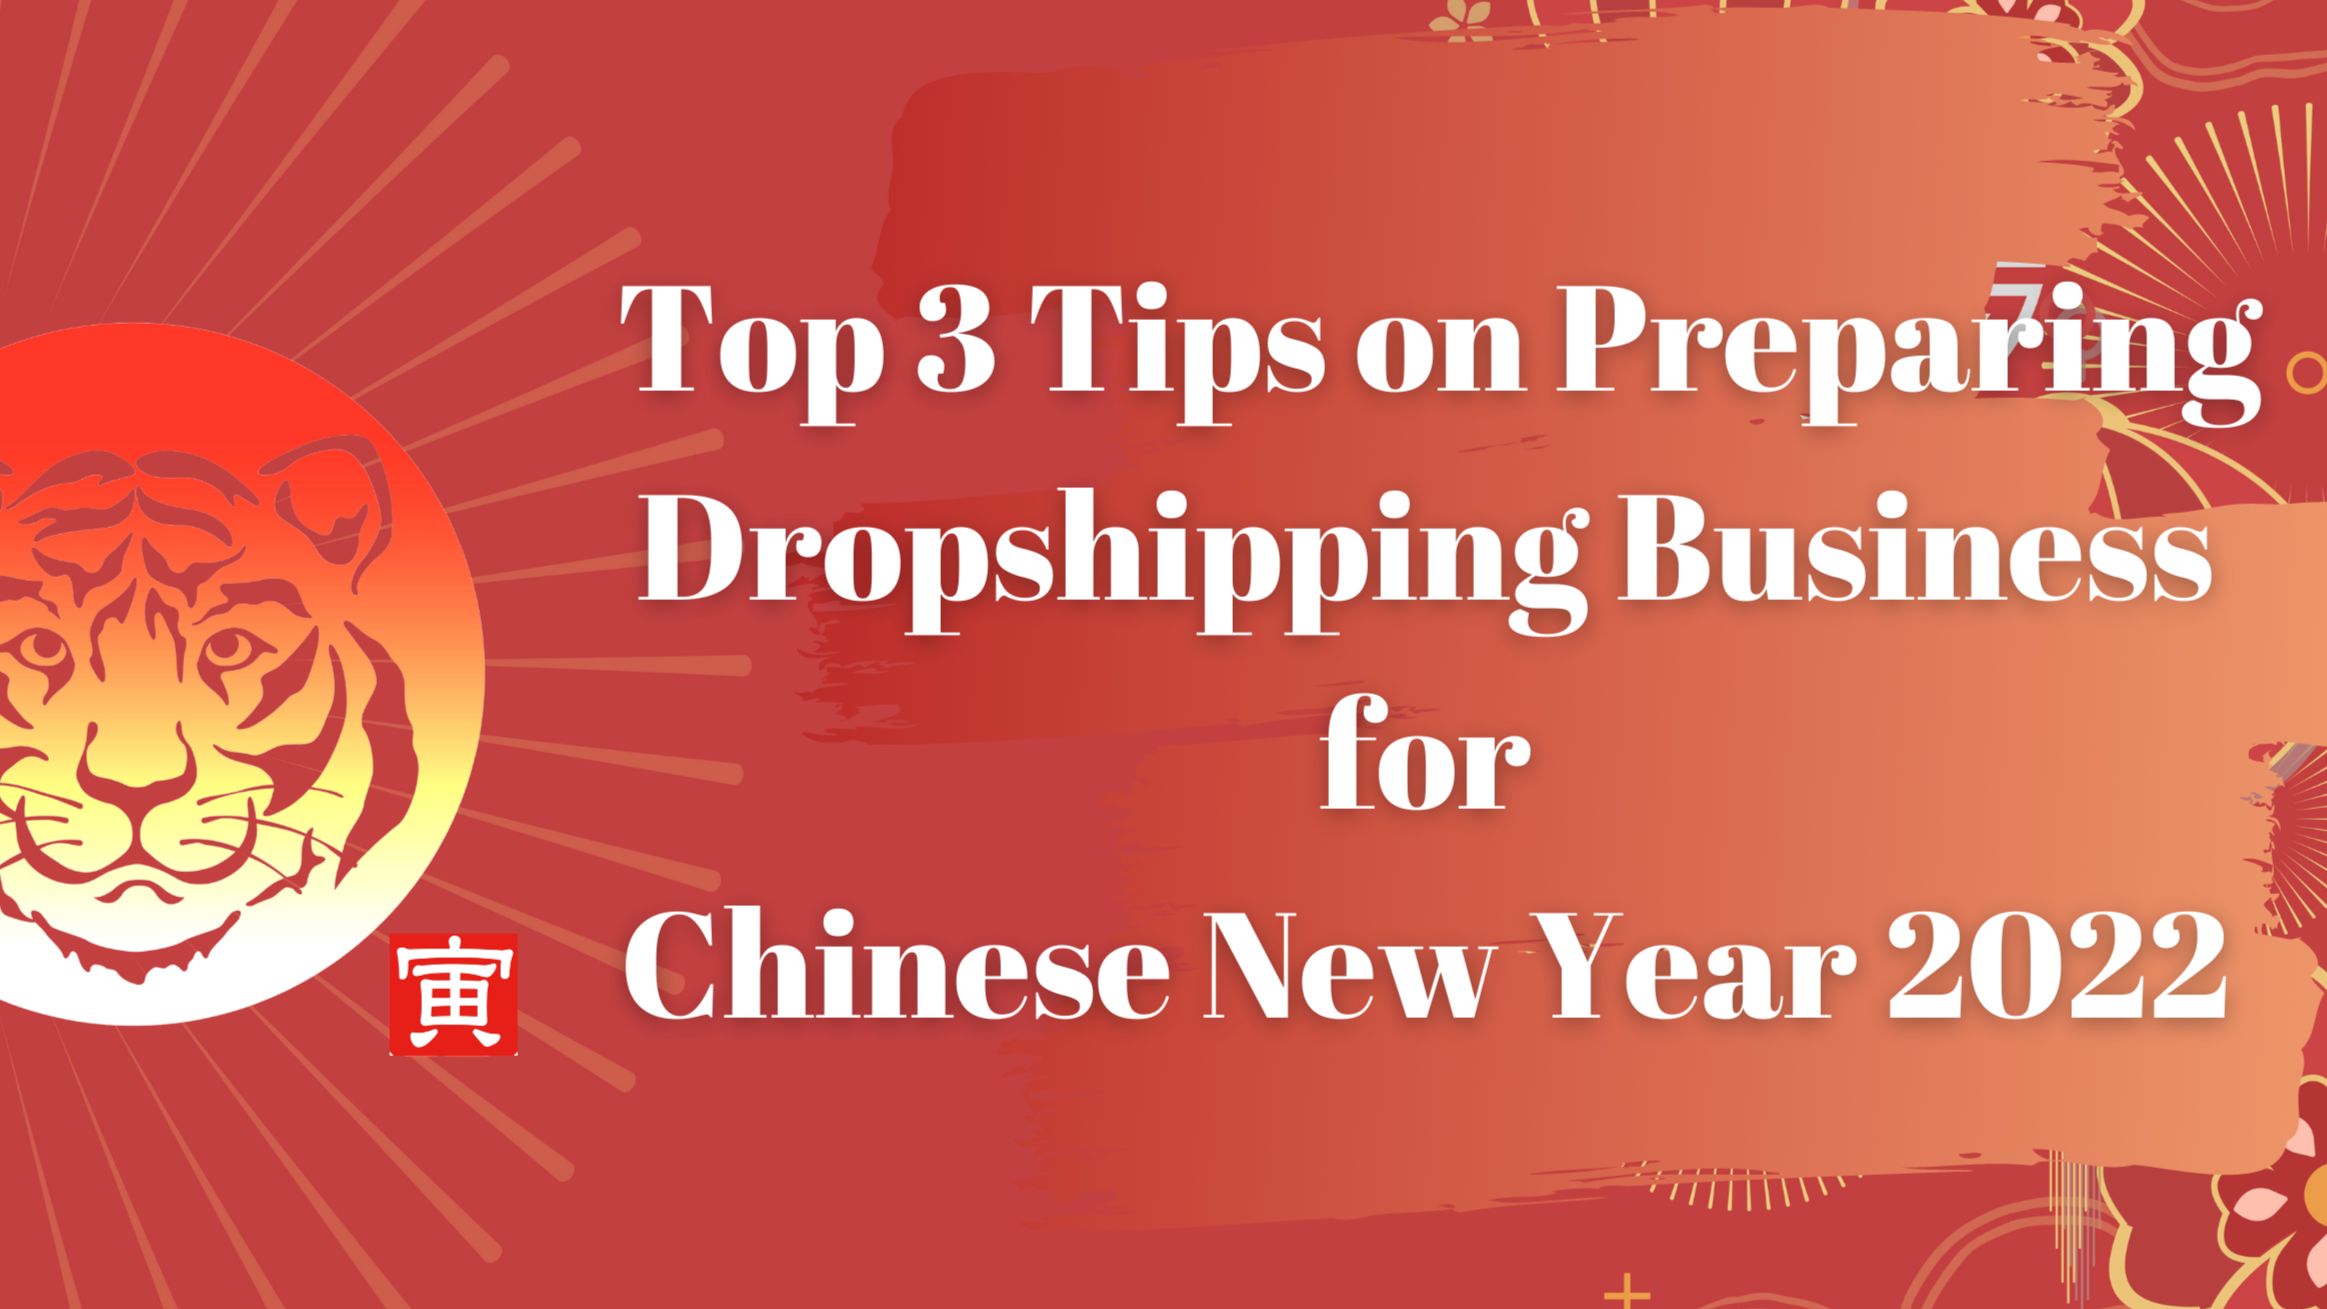 How to Start Dropshipping Business in 2022: Useful tips for you